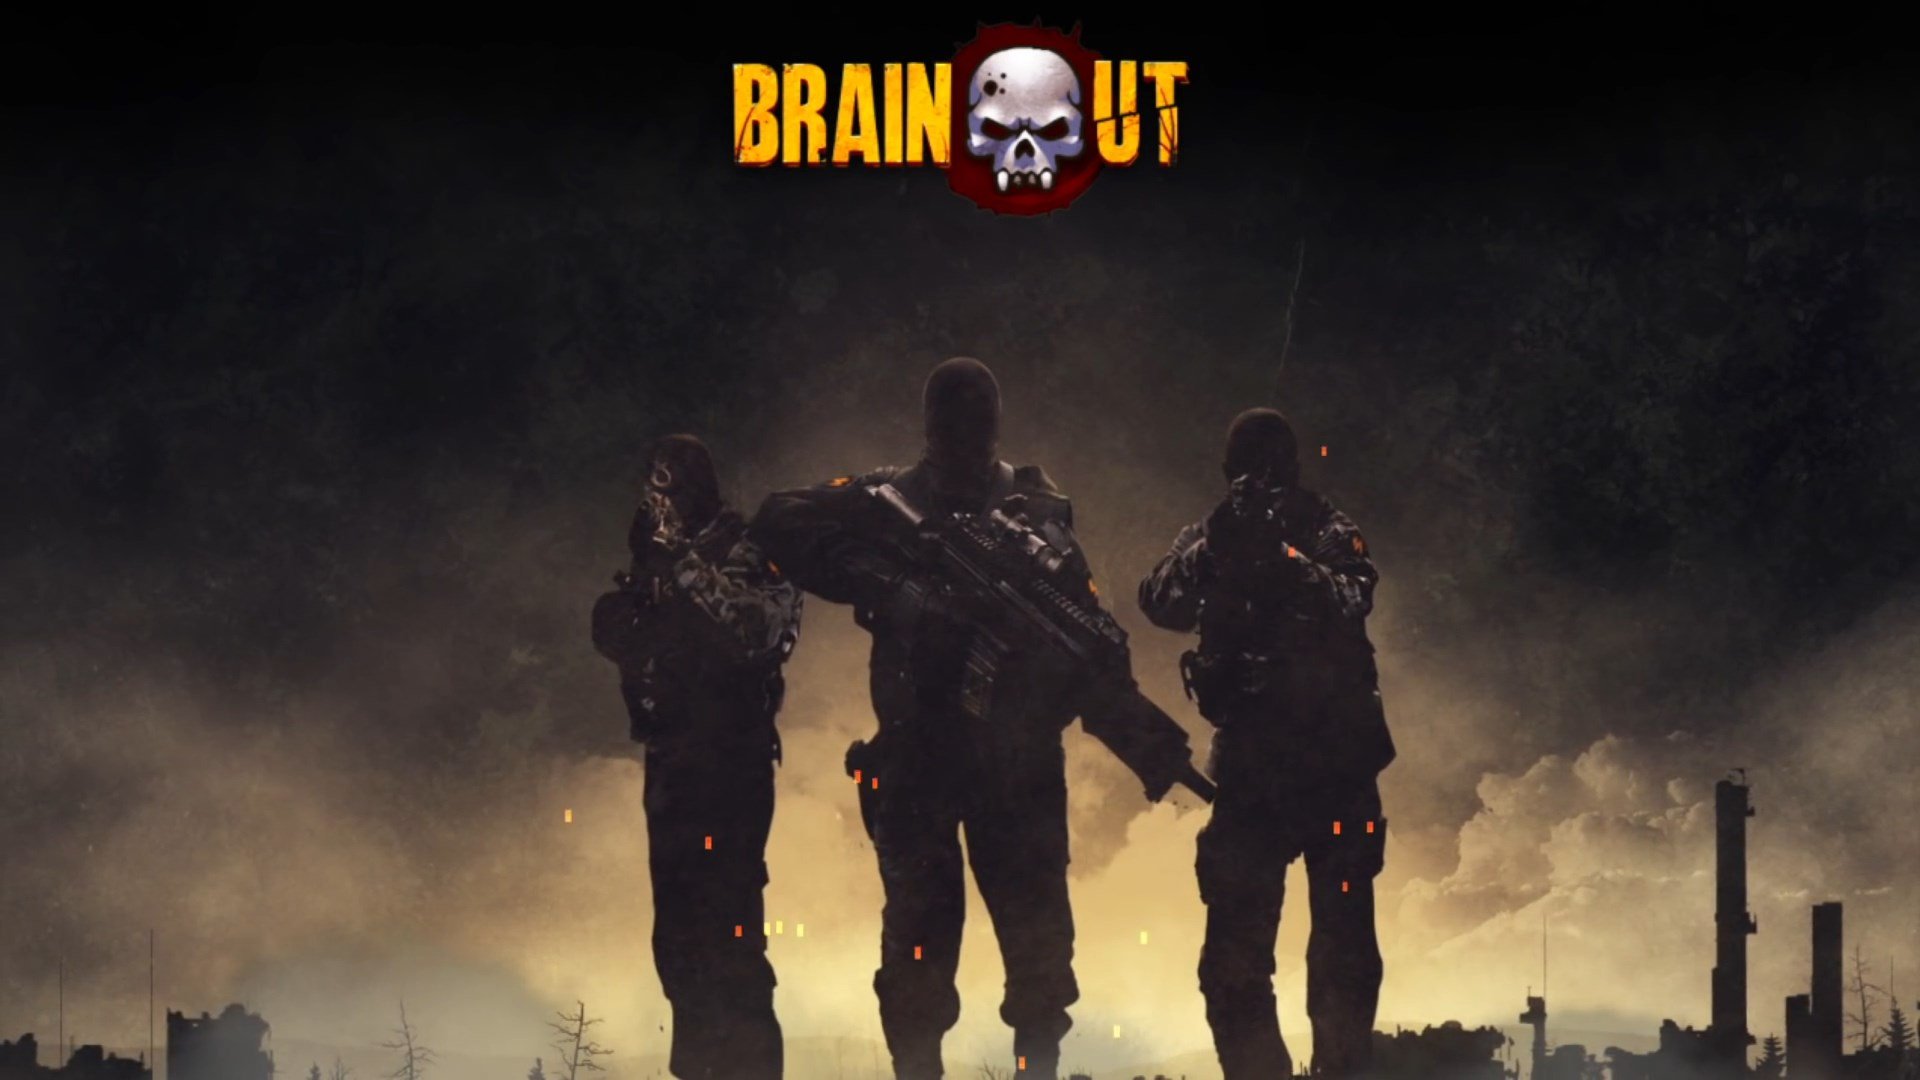 Brain out на русском. Brain out. Игра Brain out. Brain out шутер. Drain out.